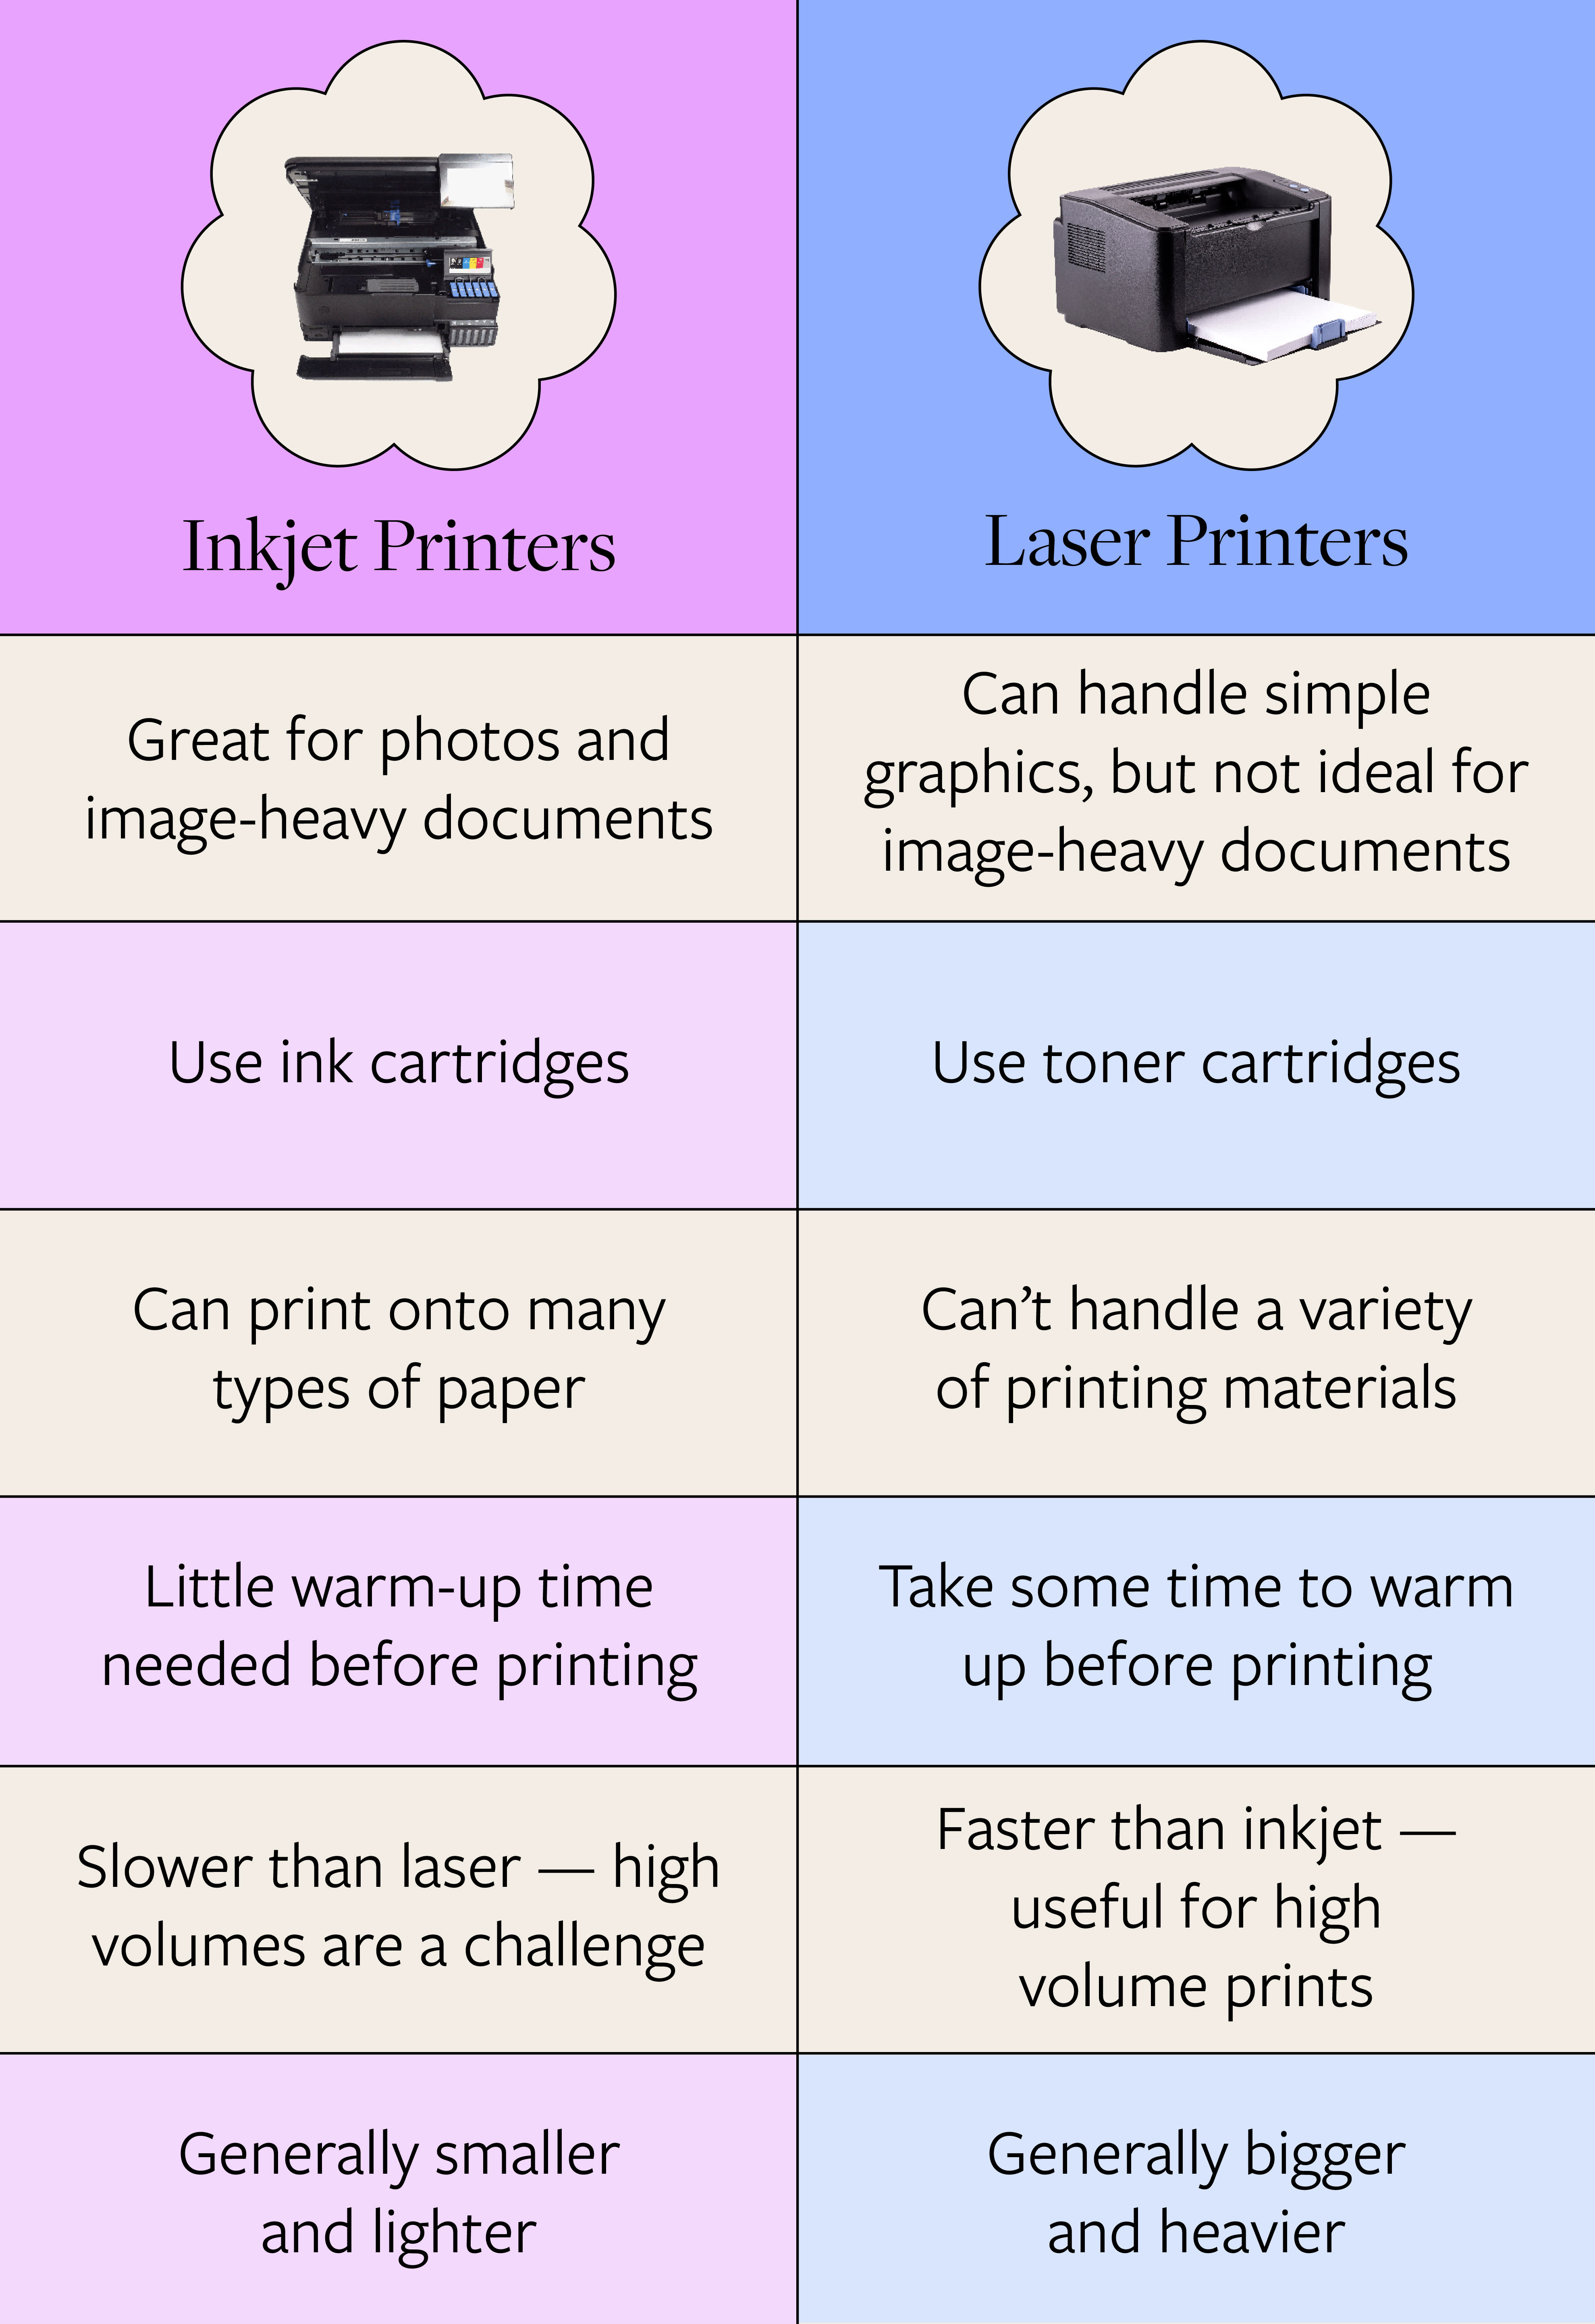 Inkjet vs Laser Printers: The Pros and Cons